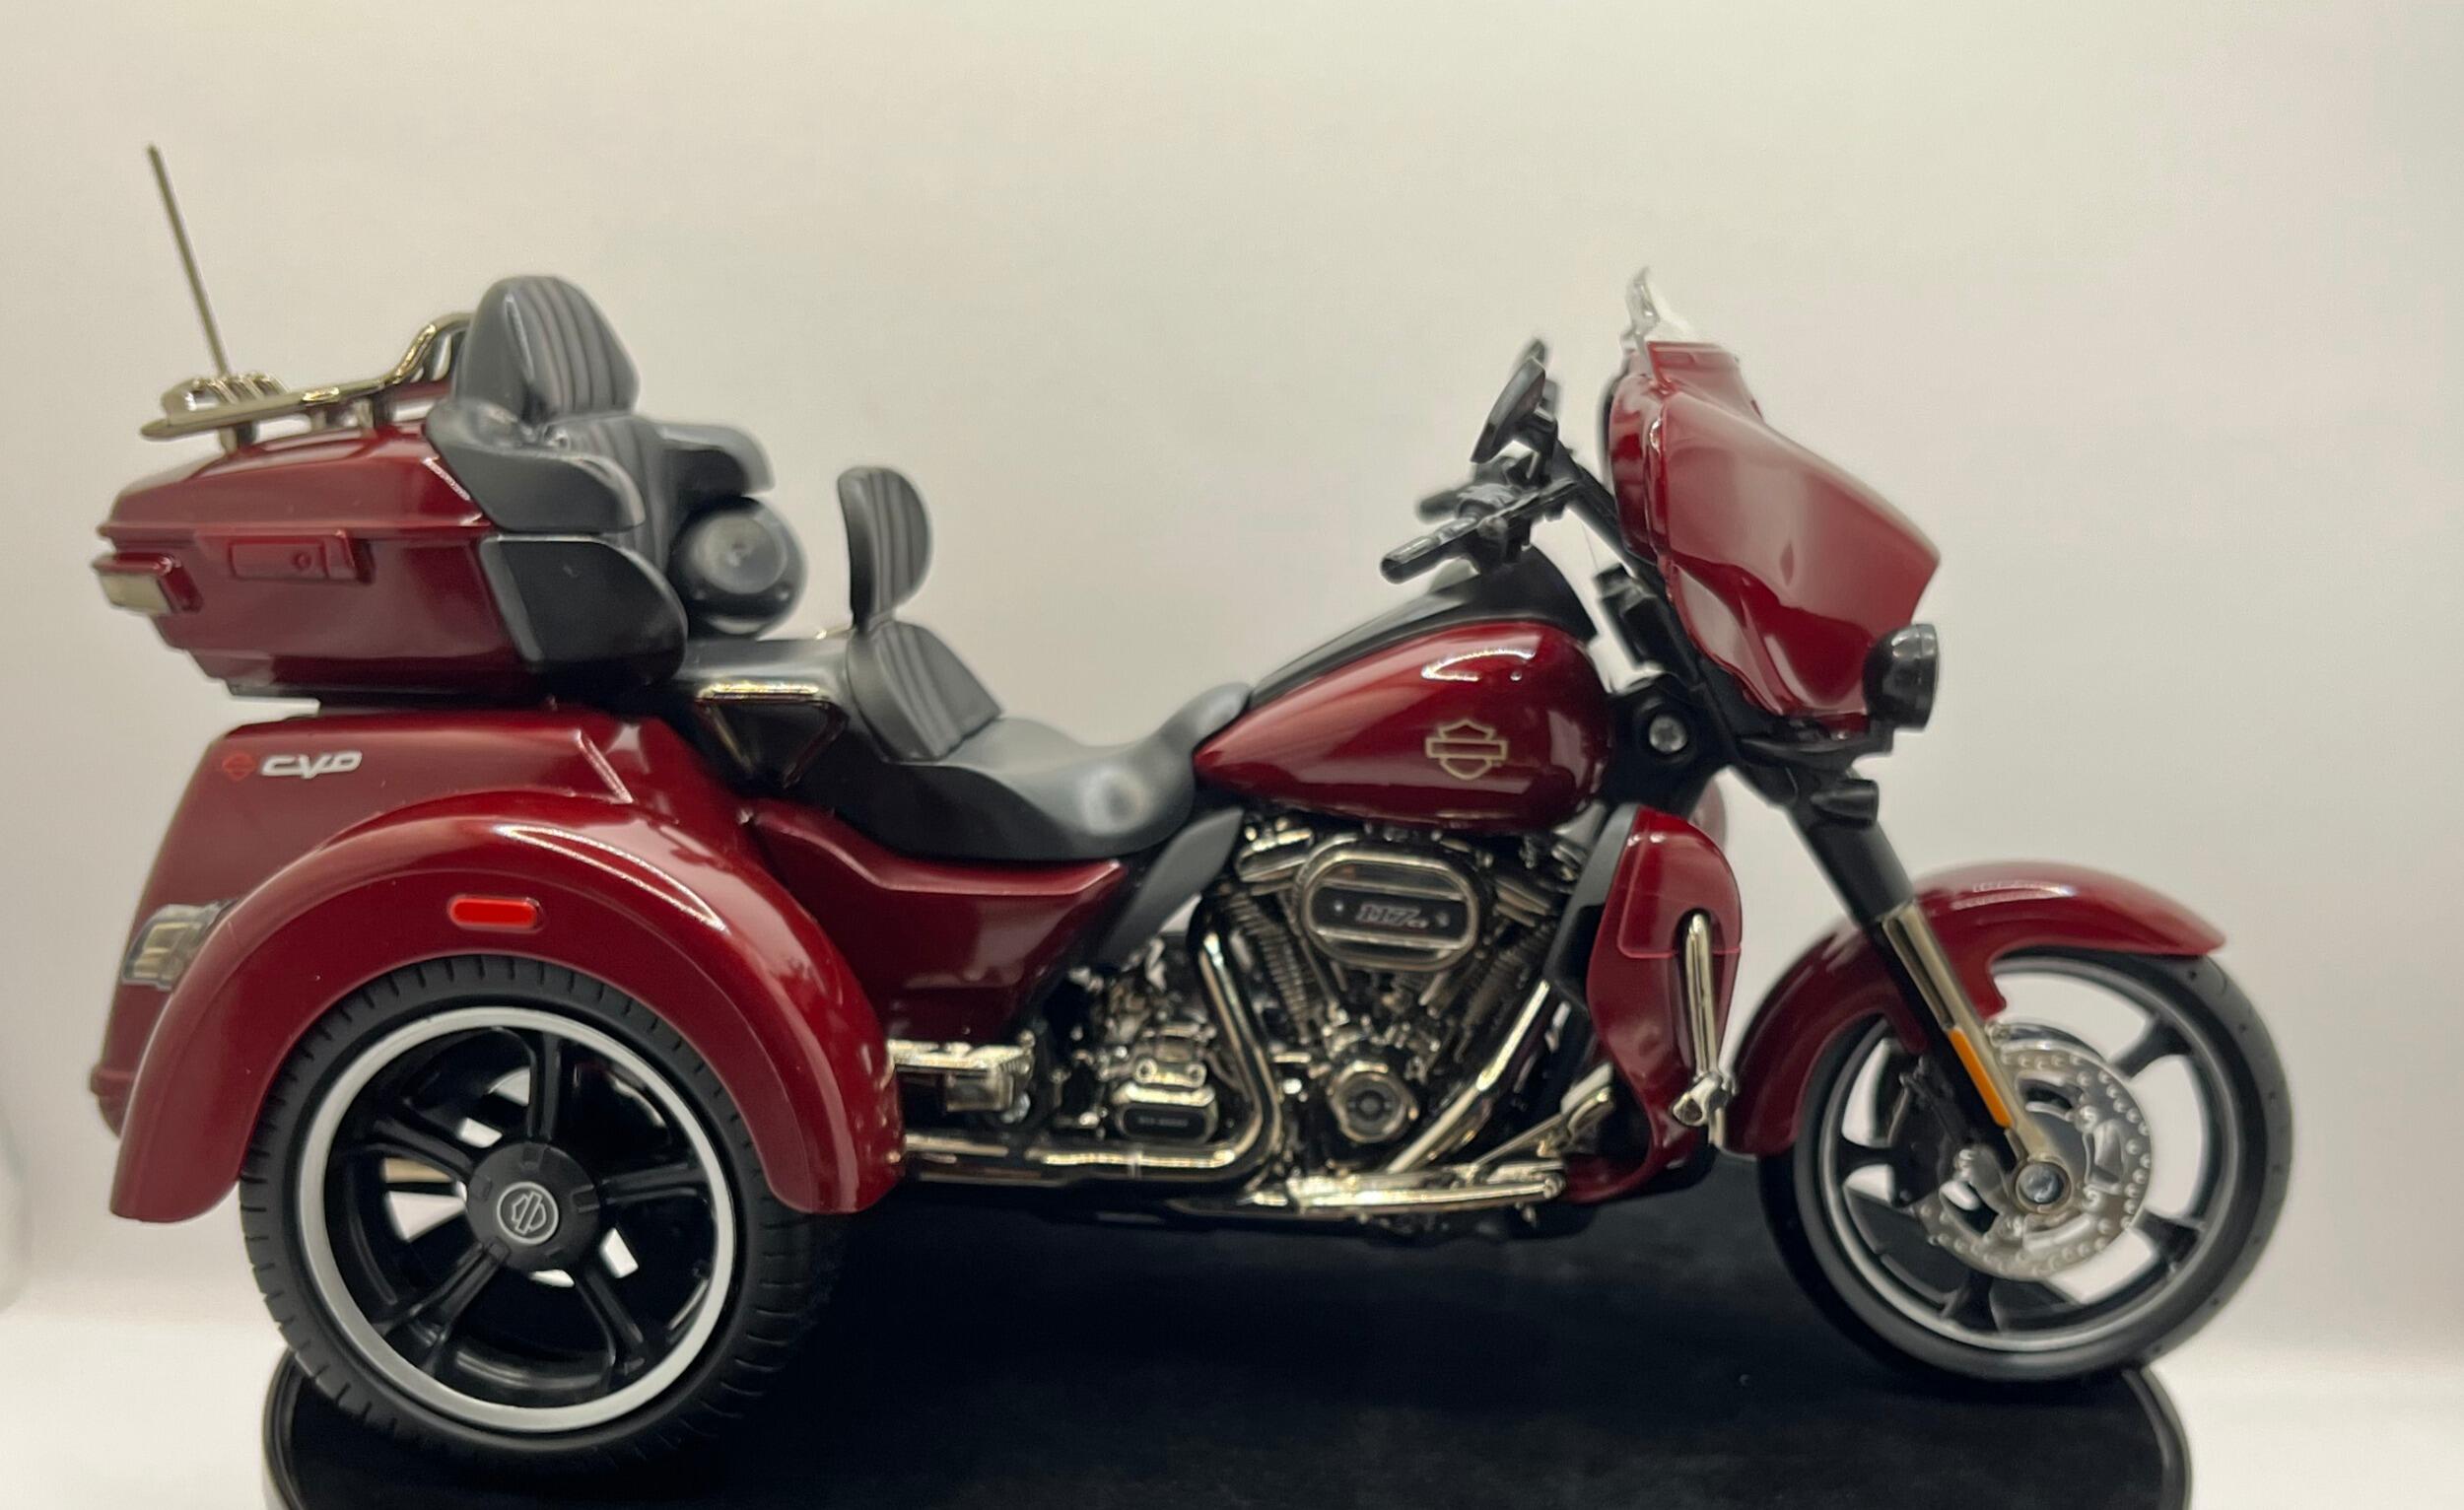 Harley Davidson 2021 CVO Tri Glide in red, 1:12 scale motorcycle model from Maisto, 32337